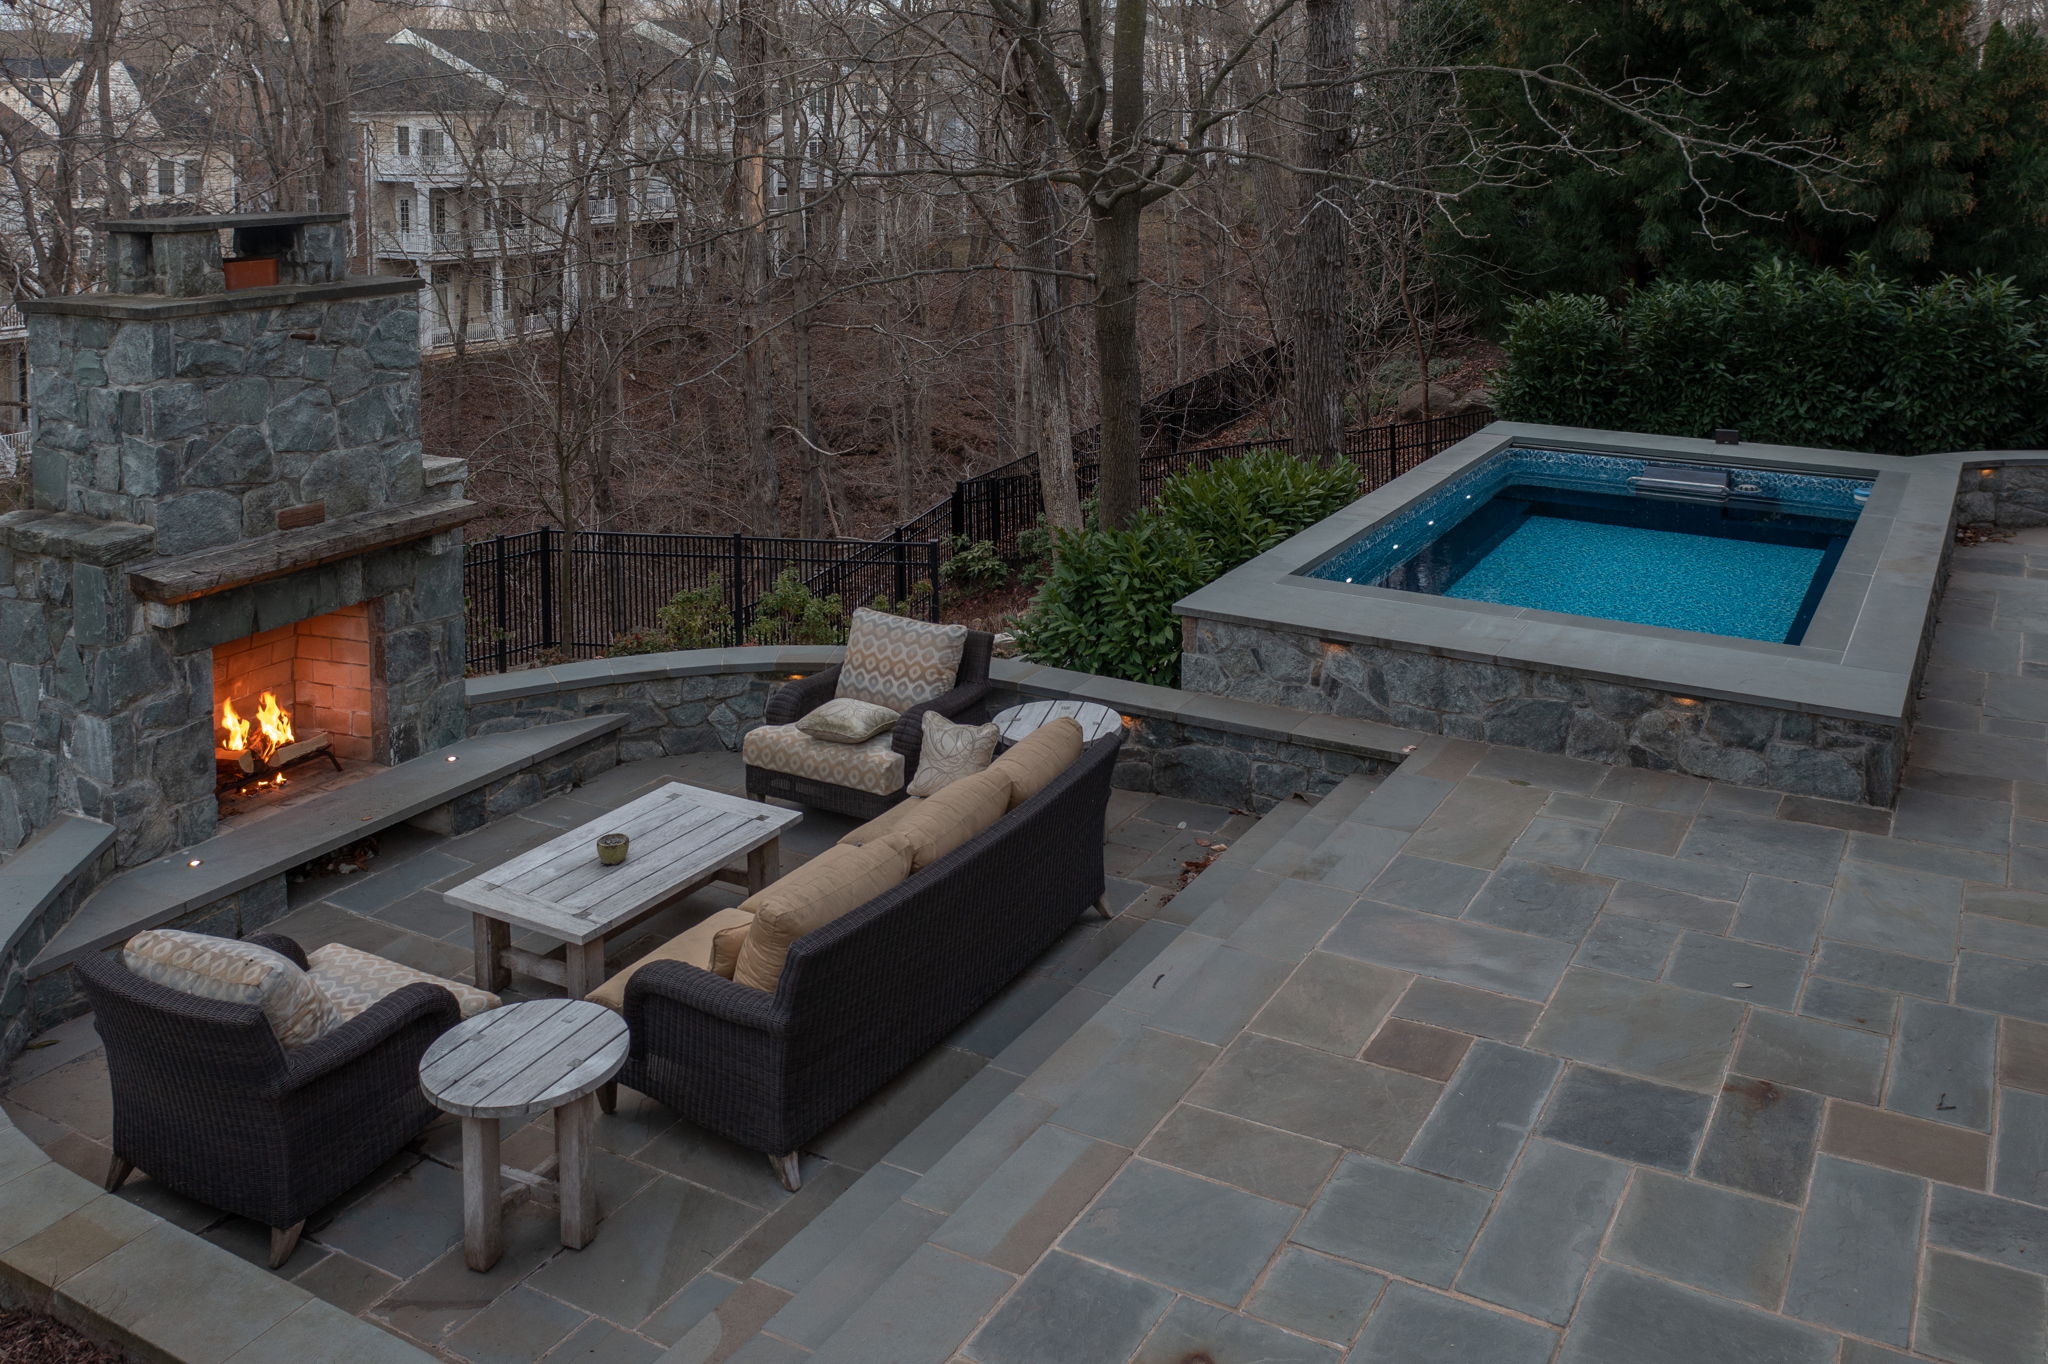 Buit in outdoor fireplace and lounge area